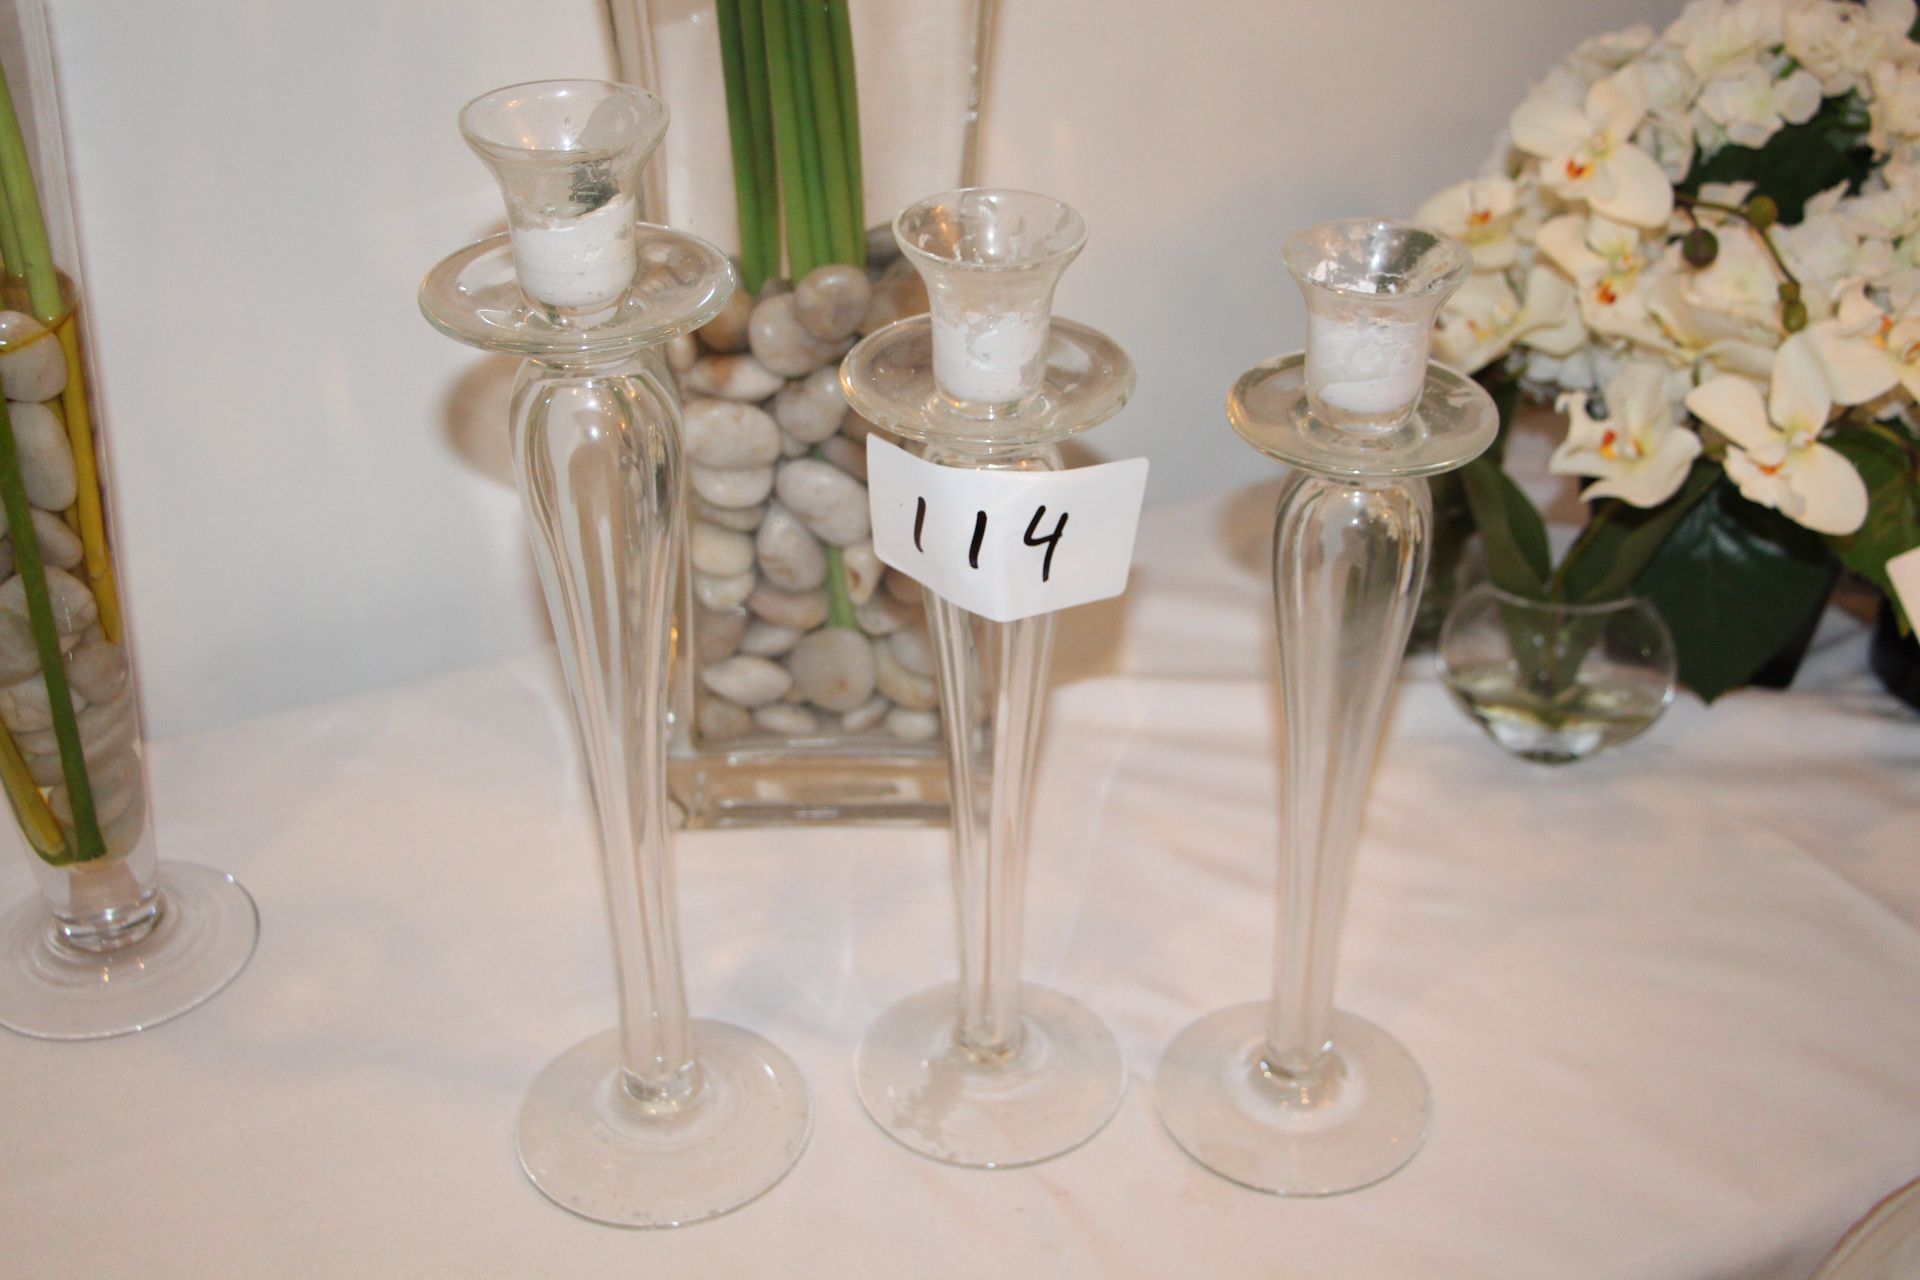 Lot 3 glass candle holder